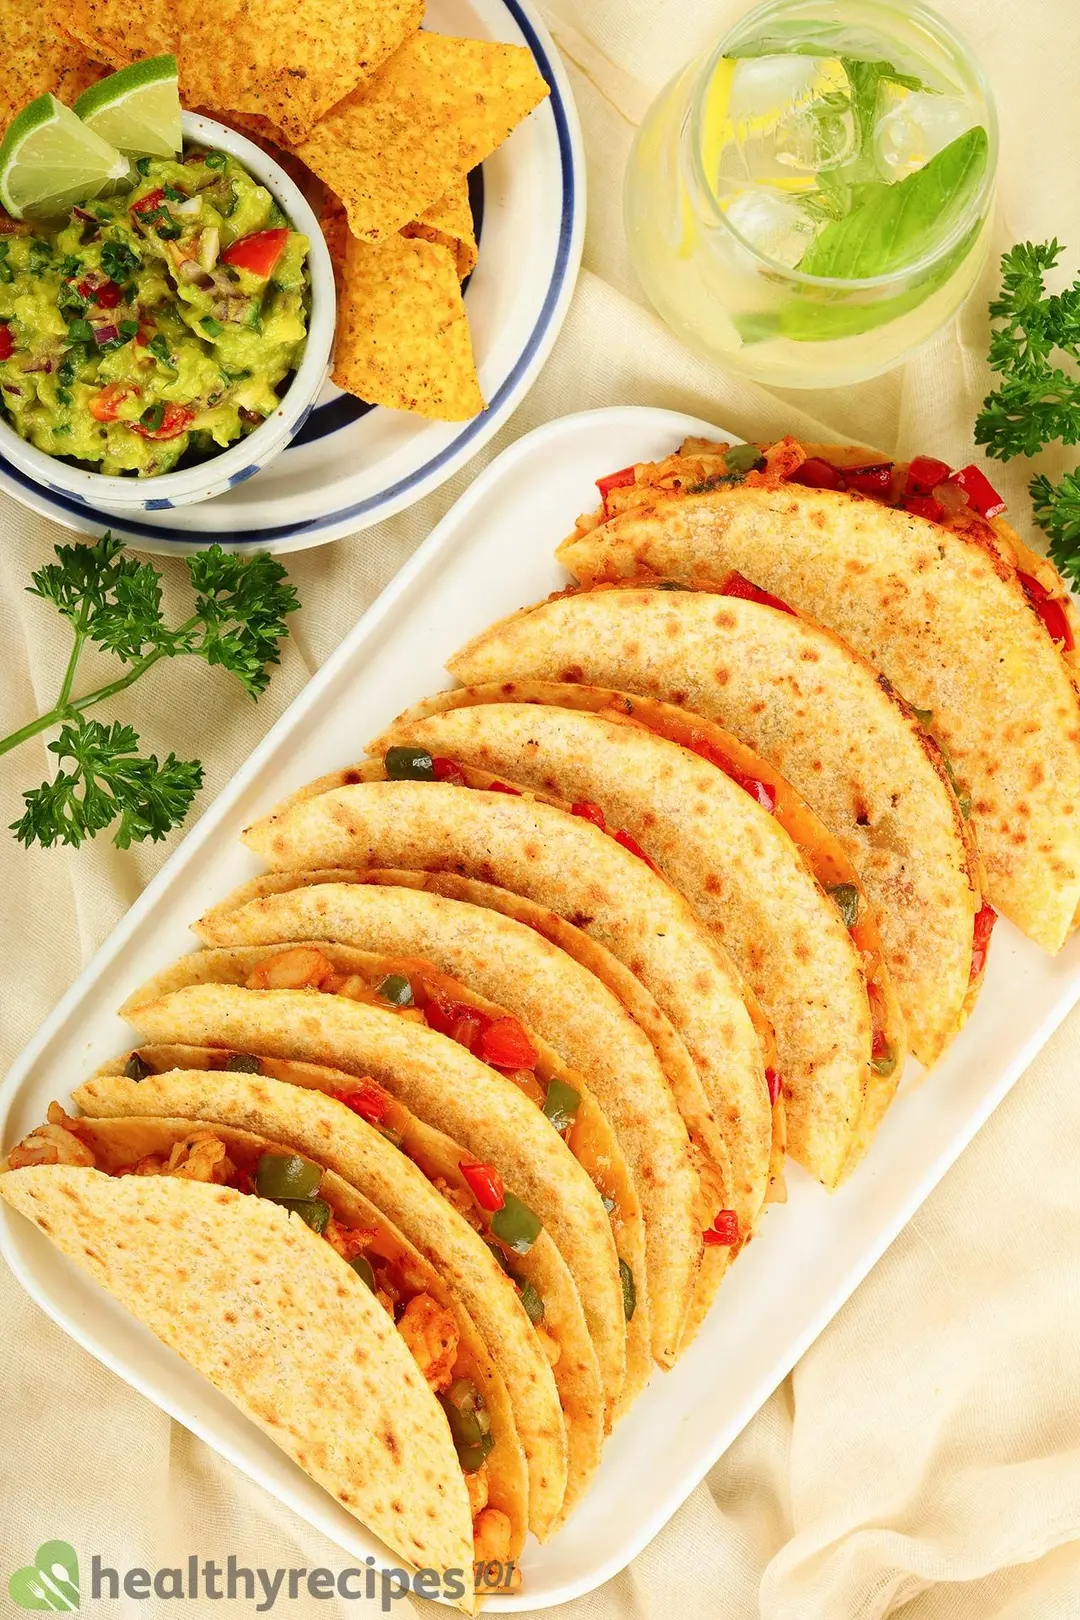 What to Serve With Shrimp Quesadillas